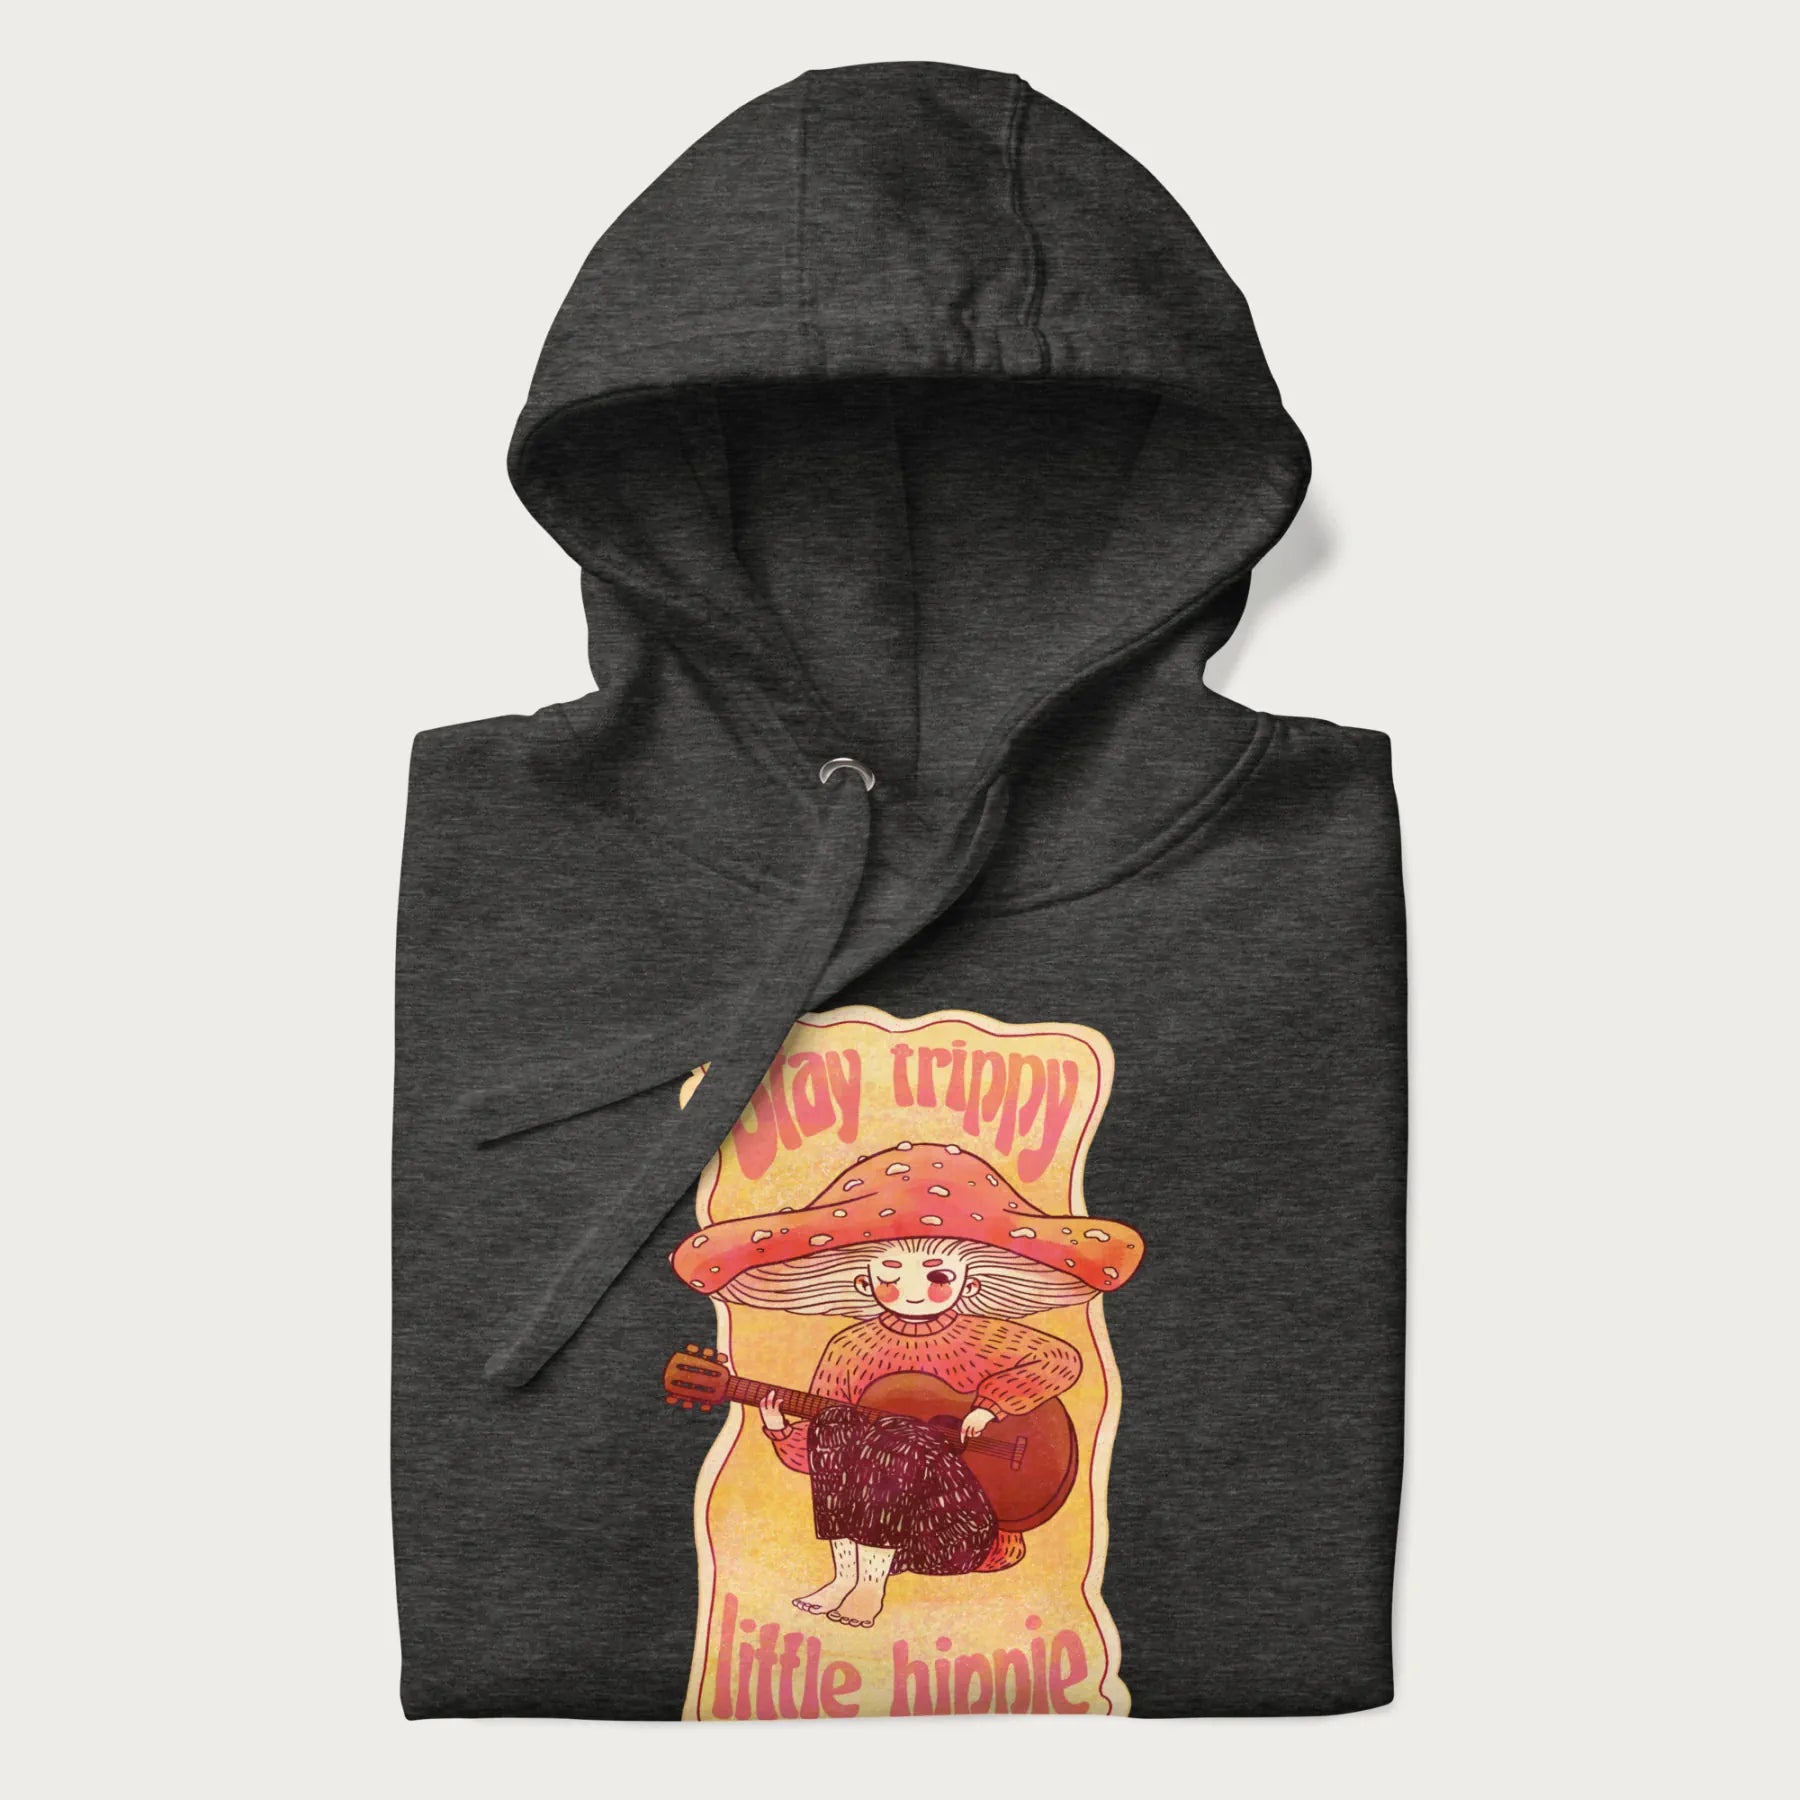 Folded dark grey hoodie with a graphic of a character with a mushroom cap playing a guitar and the text 'Stay Trippy Little Hippie.'